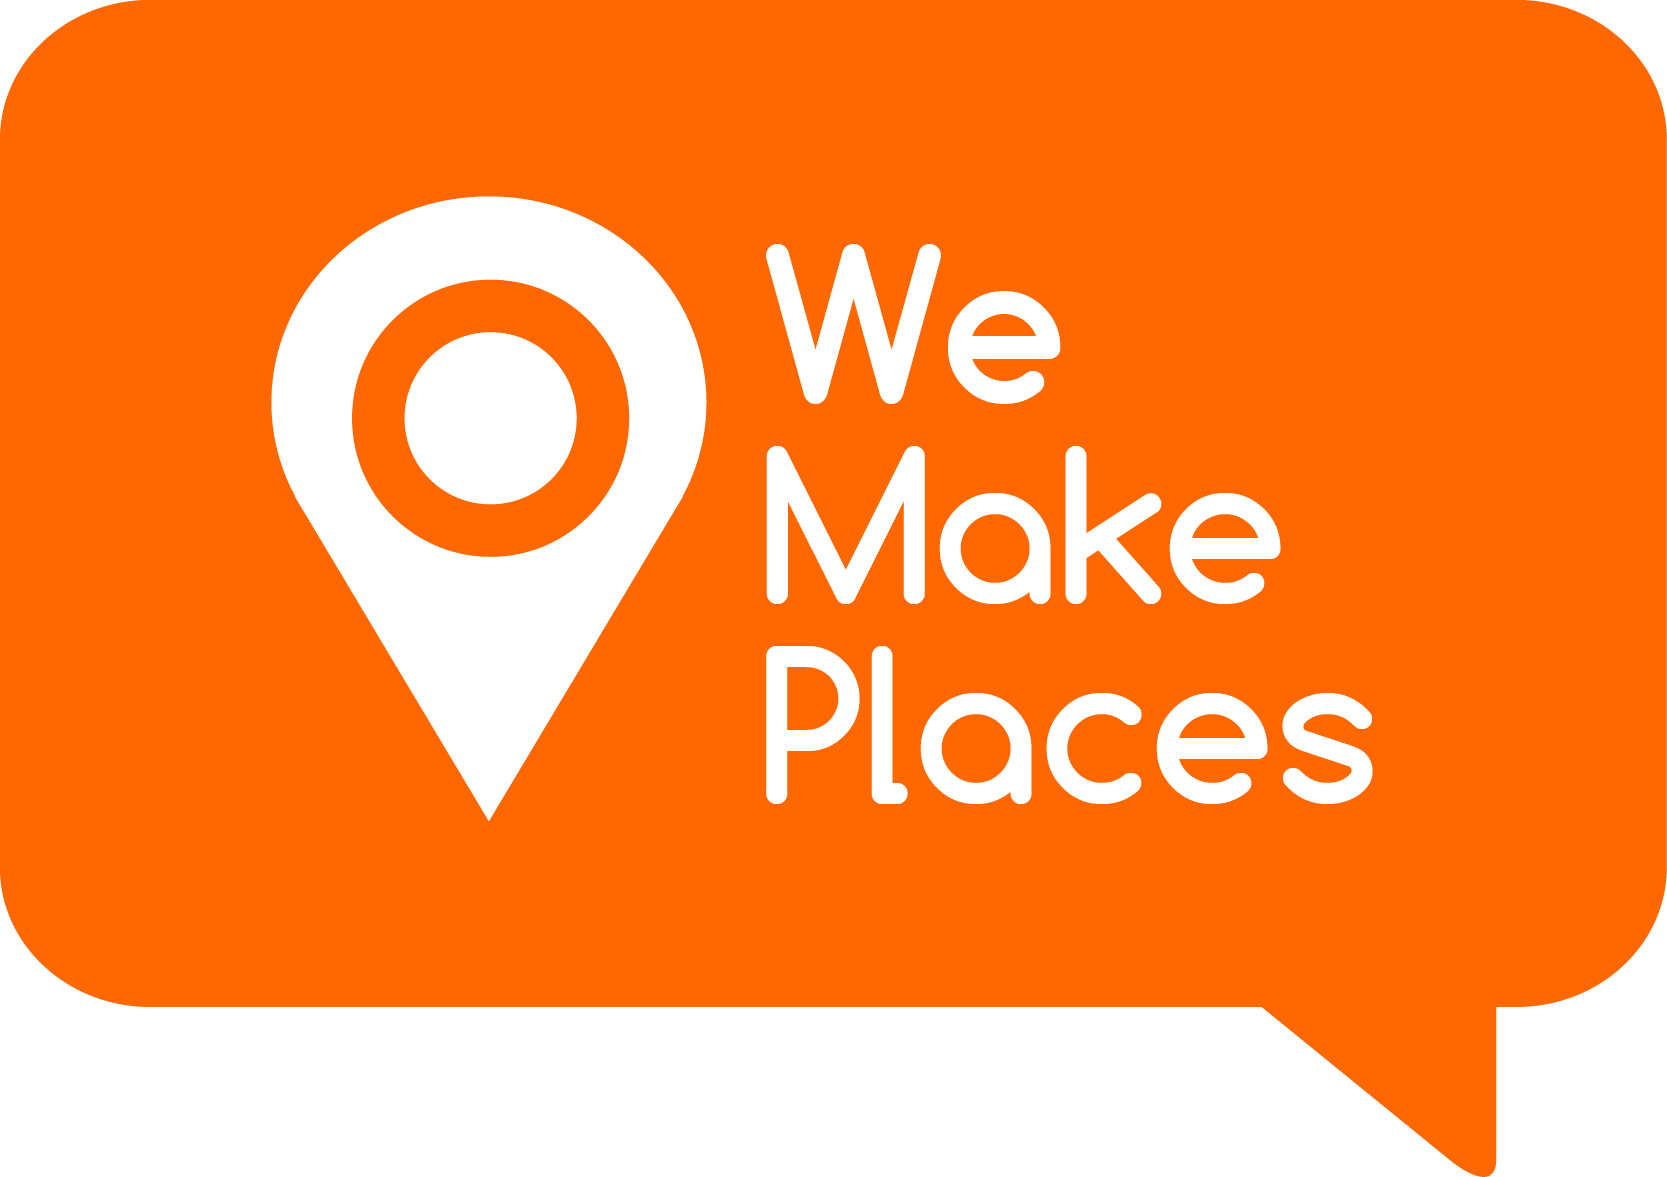 Places Logo - Peoples Palace Projects Archives We Make Places Logo Image